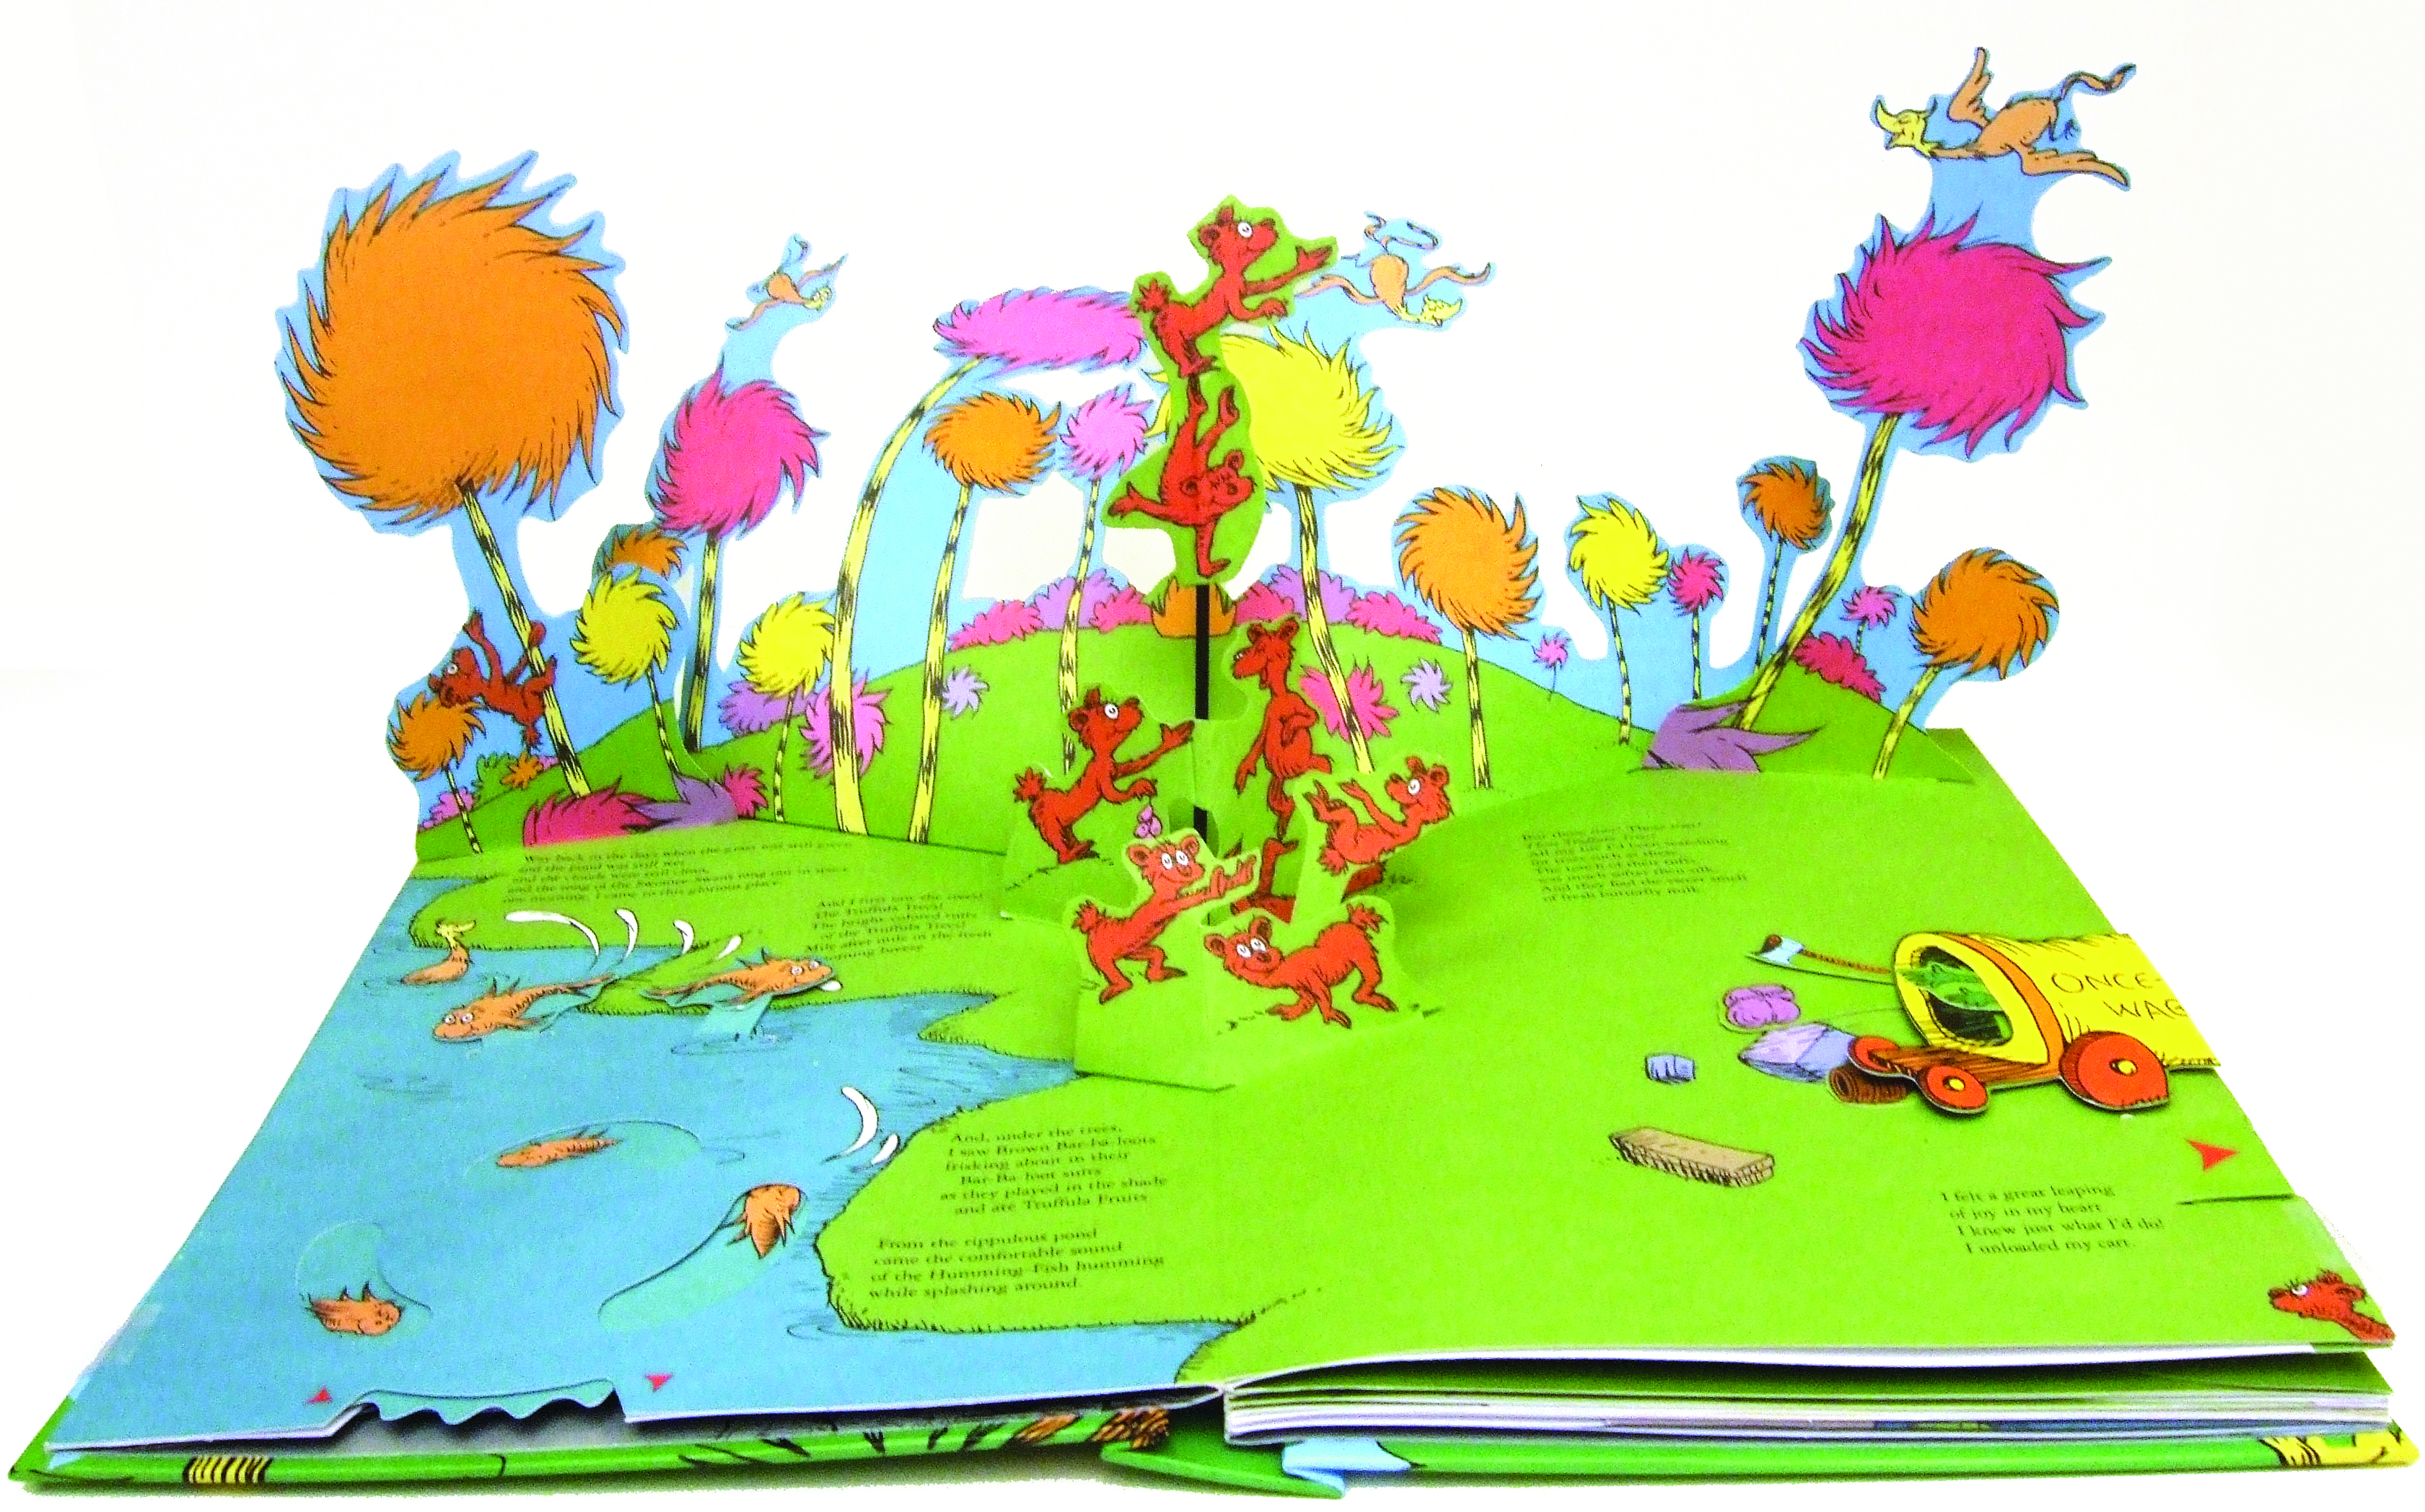 Dr Seuss The Lorax Book Read Online Free